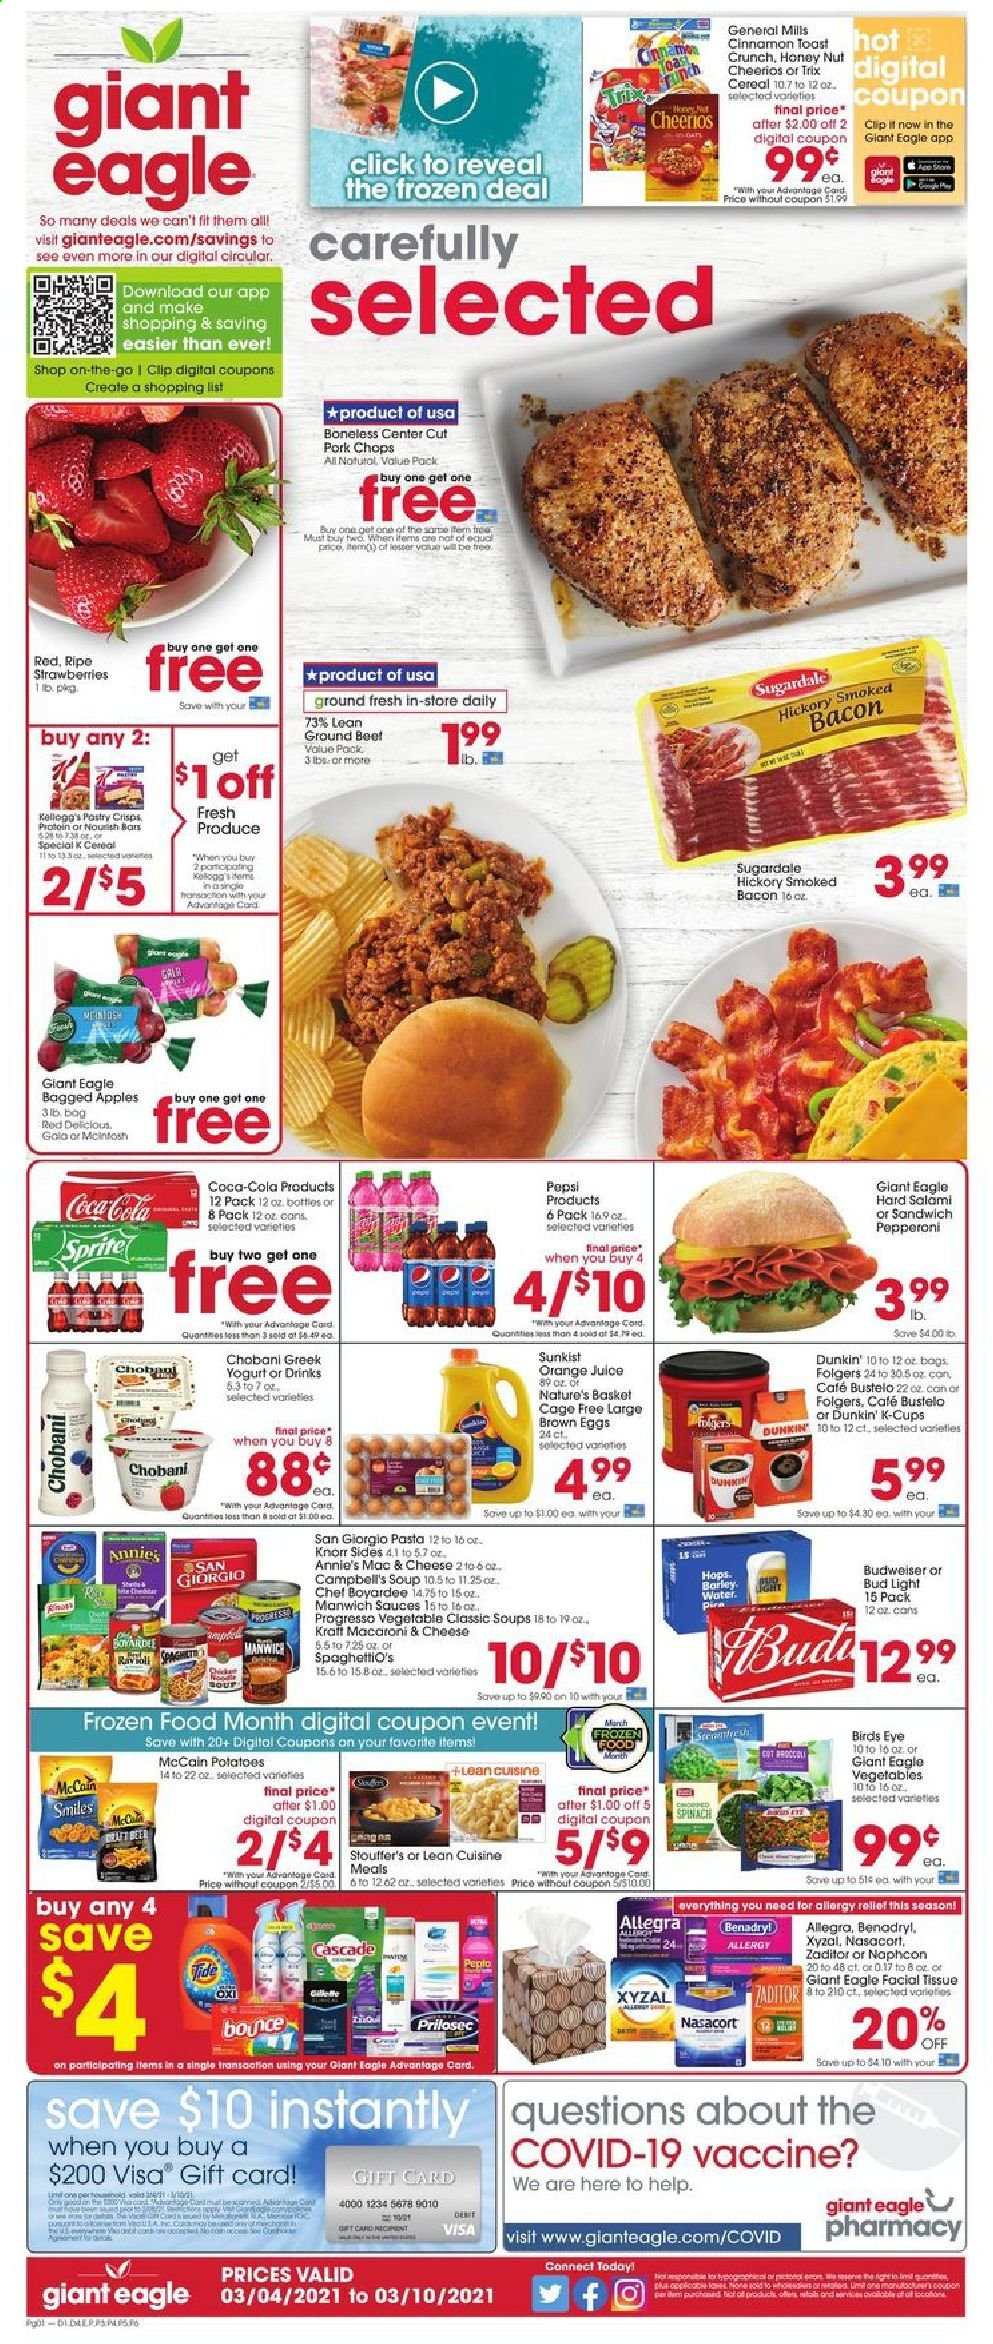 thumbnail - Giant Eagle Flyer - 03/04/2021 - 03/10/2021 - Sales products - Budweiser, toast bread, apples, Campbell's, macaroni & cheese, sandwich, soup, Bird's Eye, Progresso, Lean Cuisine, Annie's, bacon, salami, pepperoni, greek yoghurt, yoghurt, Chobani, eggs, cage free eggs, spinach, strawberries, Stouffer's, McCain, Manwich, cereals, Cheerios, pasta, cinnamon, Coca-Cola, Sprite, Pepsi, orange juice, juice, Folgers, coffee capsules, K-Cups, beer, Bud Light, beef meat, ground beef, pork chops, pork meat, tissues, Cascade, Bounce, basket. Page 1.